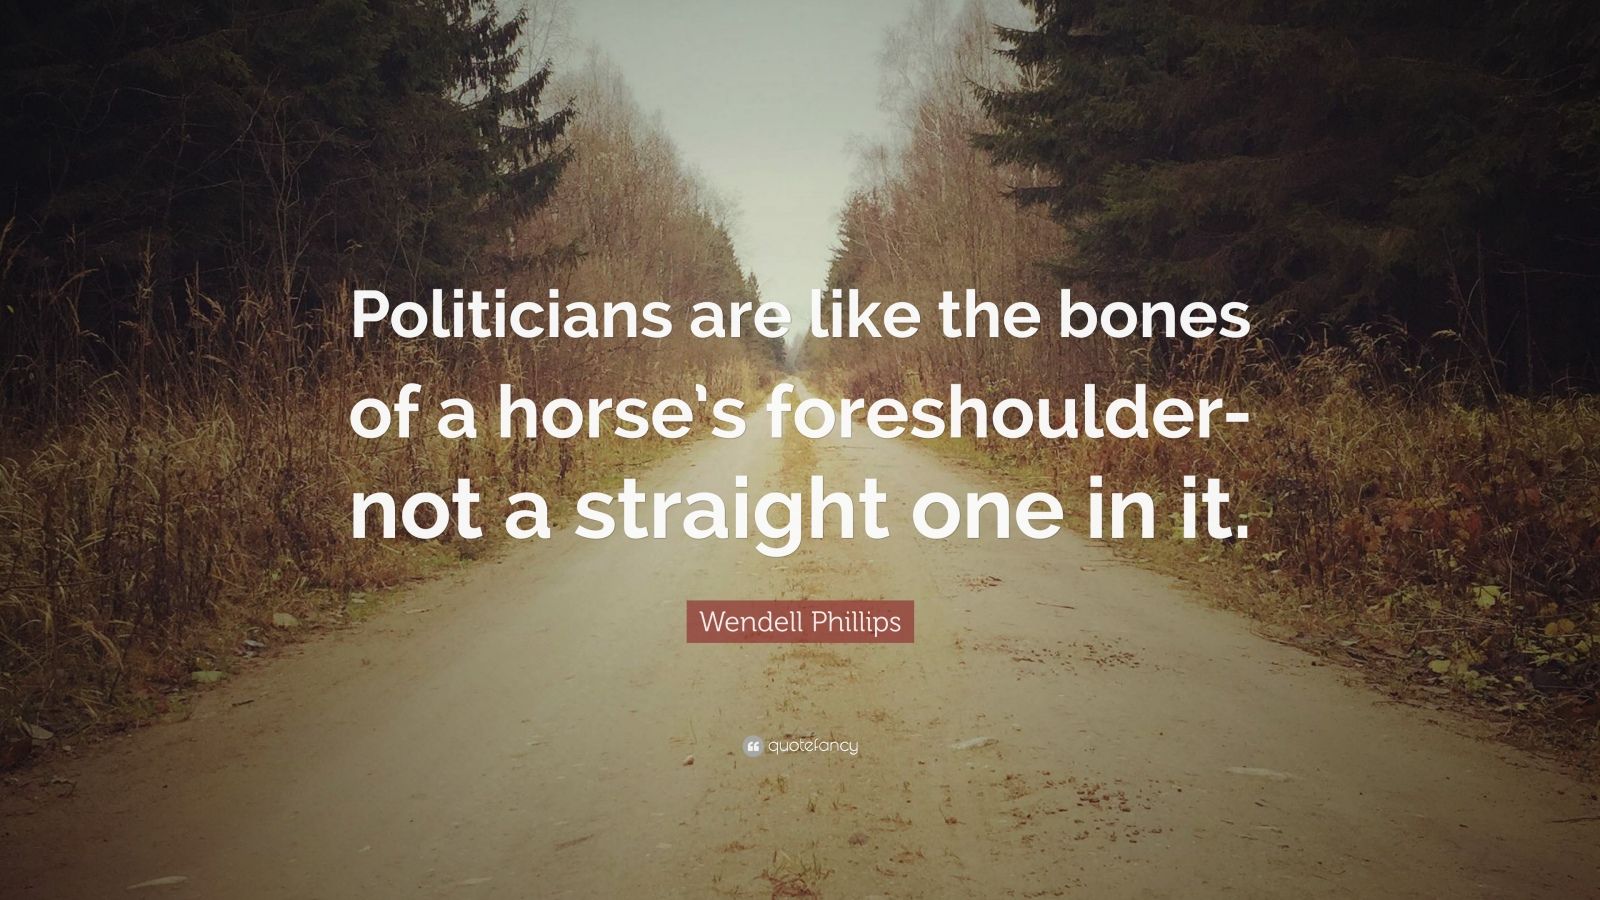 Wendell Phillips Quote: "Politicians are like the bones of a horse's foreshoulder-not a straight ...